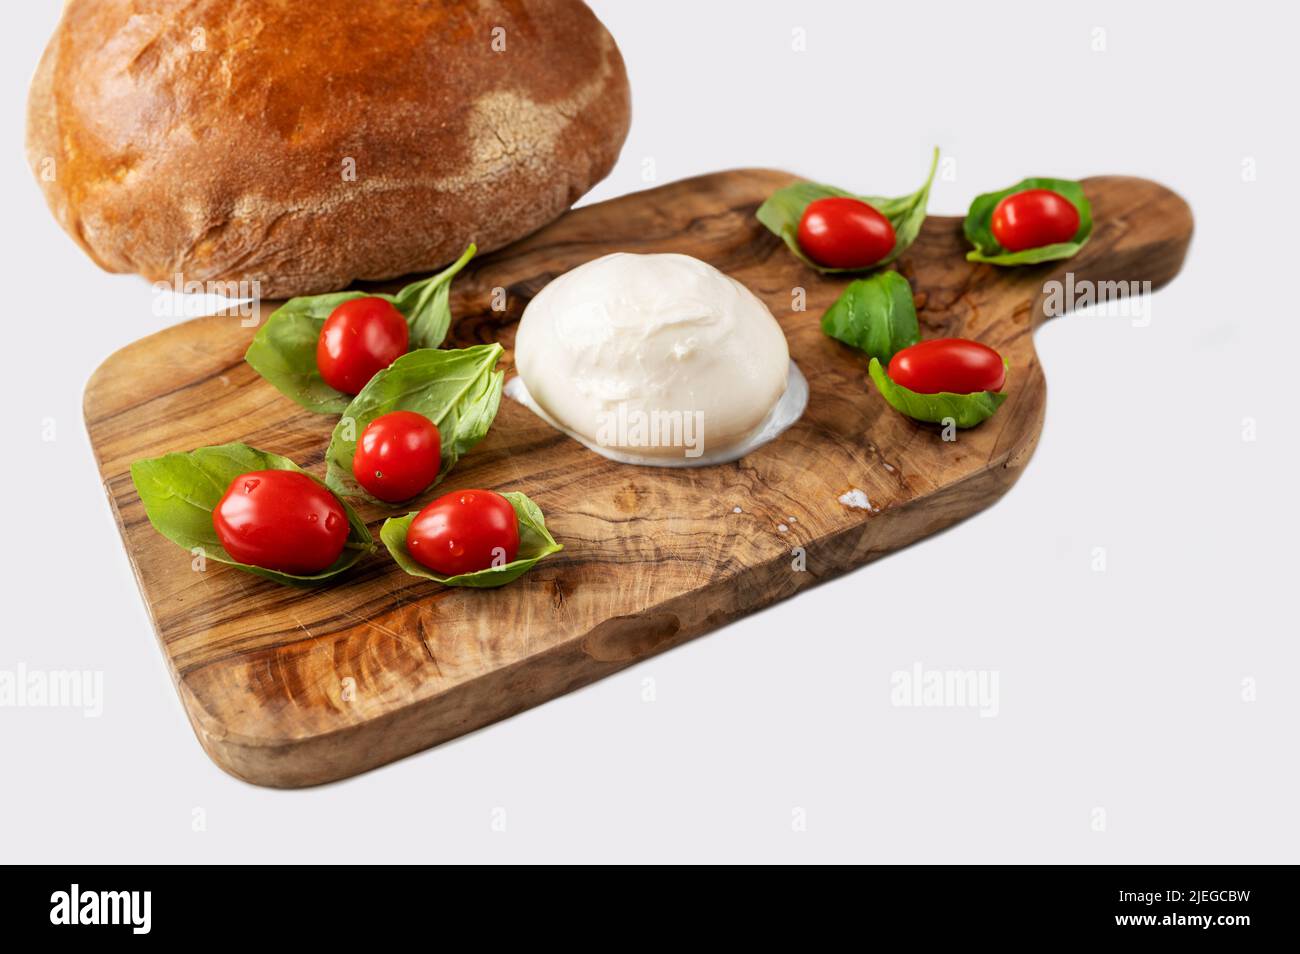 Cherry tomato on green basil leaf and mozzarella on wooden kitchen board, fresh bread loaf on white background, isolated,closeup. Stock Photo